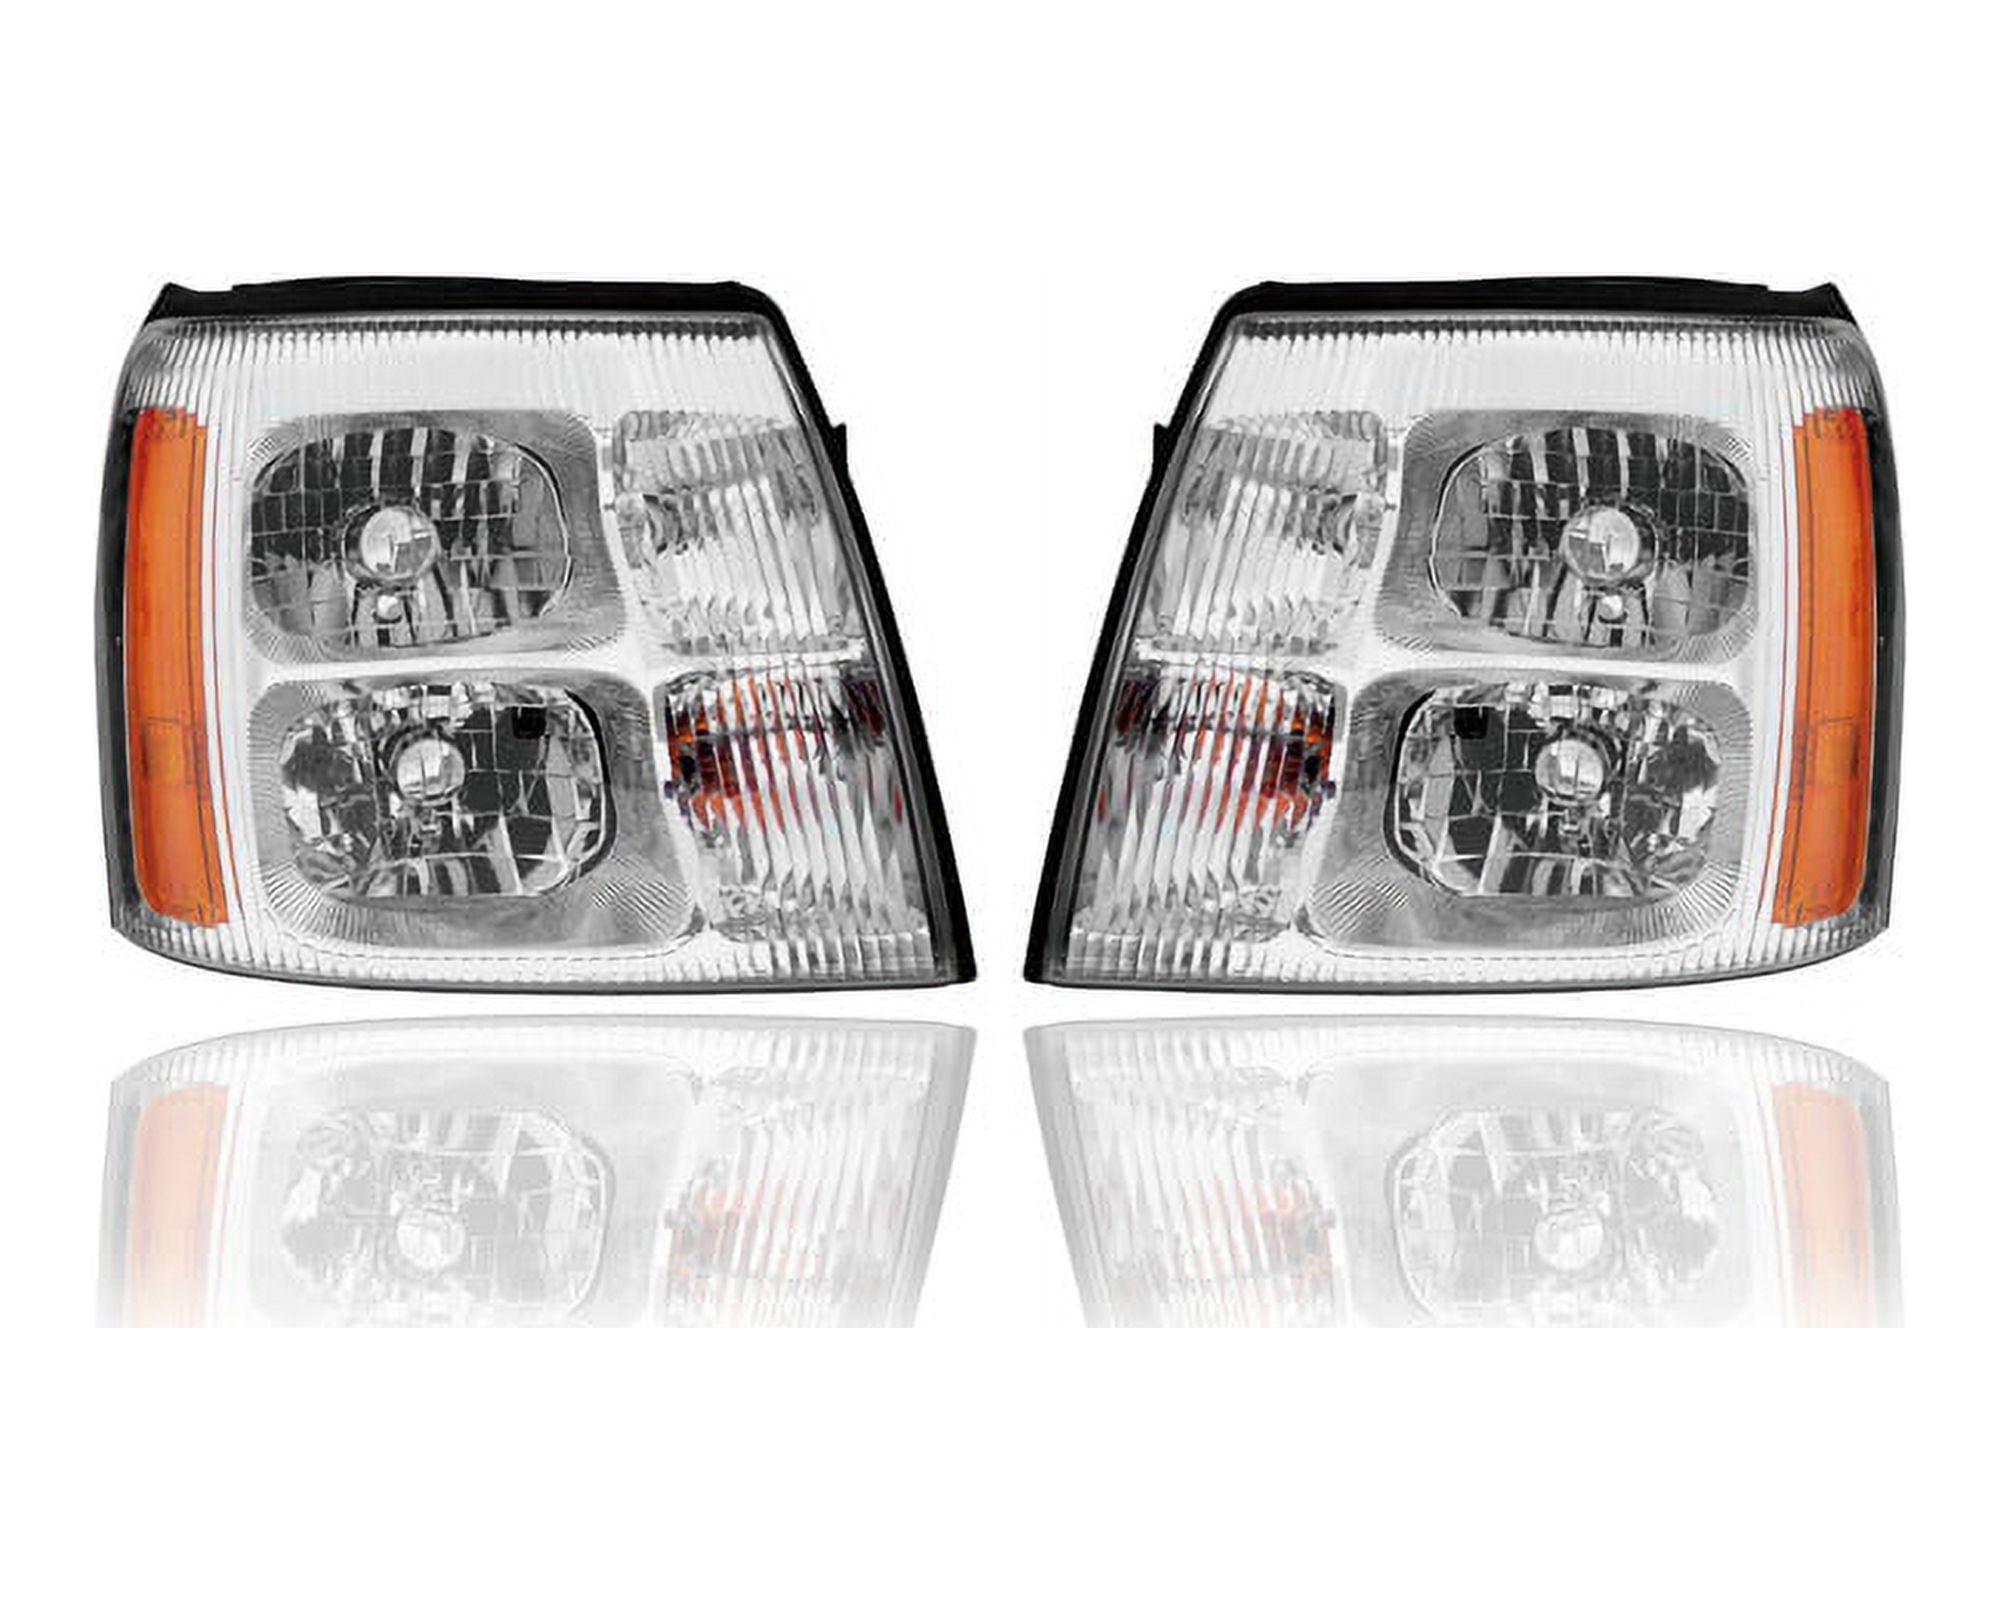 Headlight Assembly - Compatible/Replacement for '03-06 Cadillac Escalade/EXT/ESV  - HID Type Without HID Kit - Pair, Left Driver + Right Passenger Set -  19208223, 19208222 